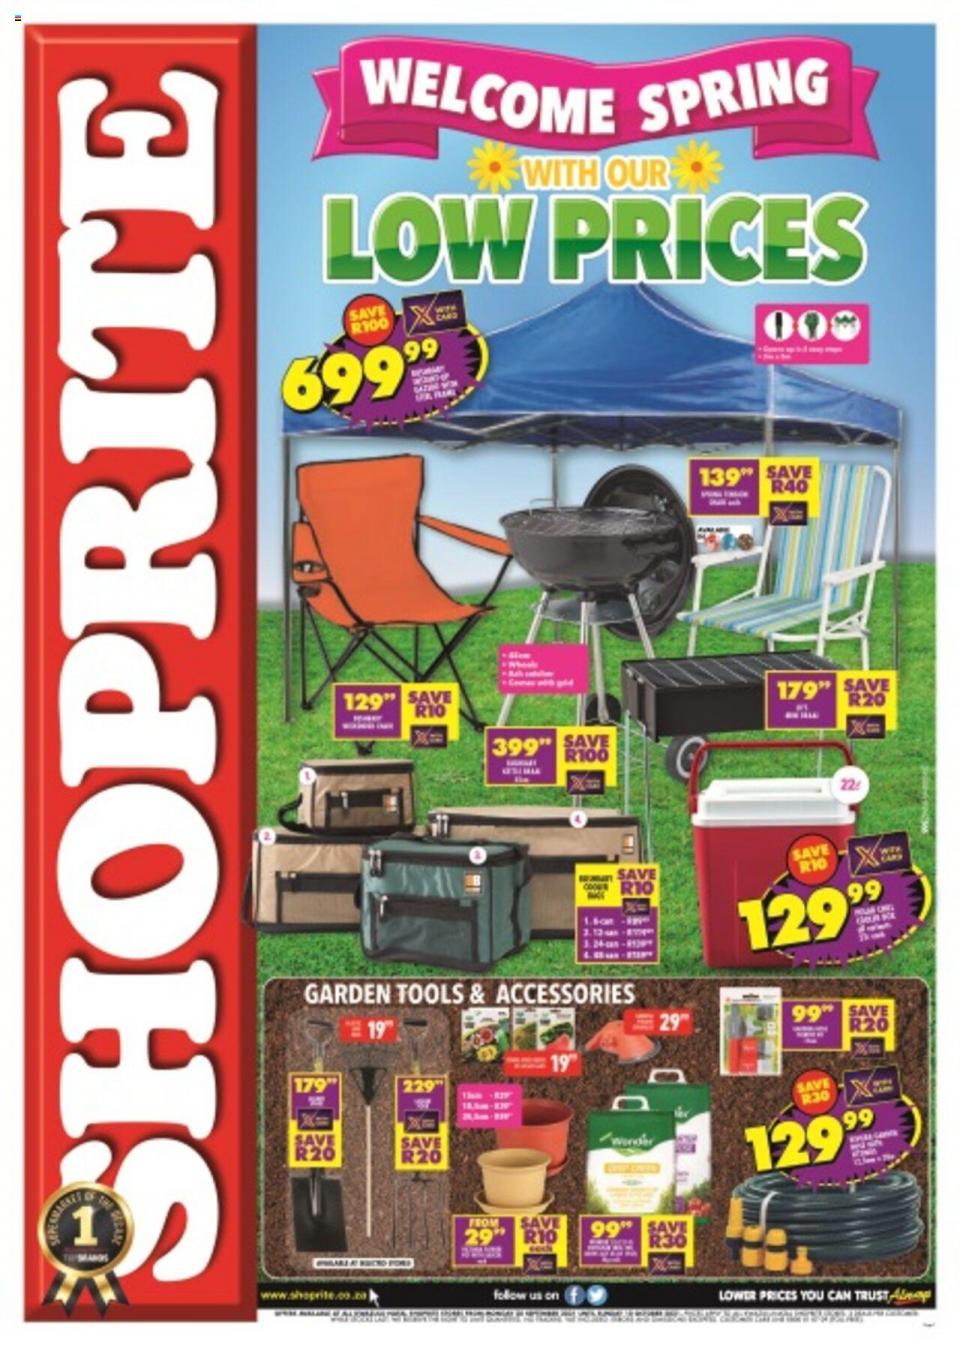 Shoprite Specials Spring Low Prices 20 Sep – 10 Oct 2021